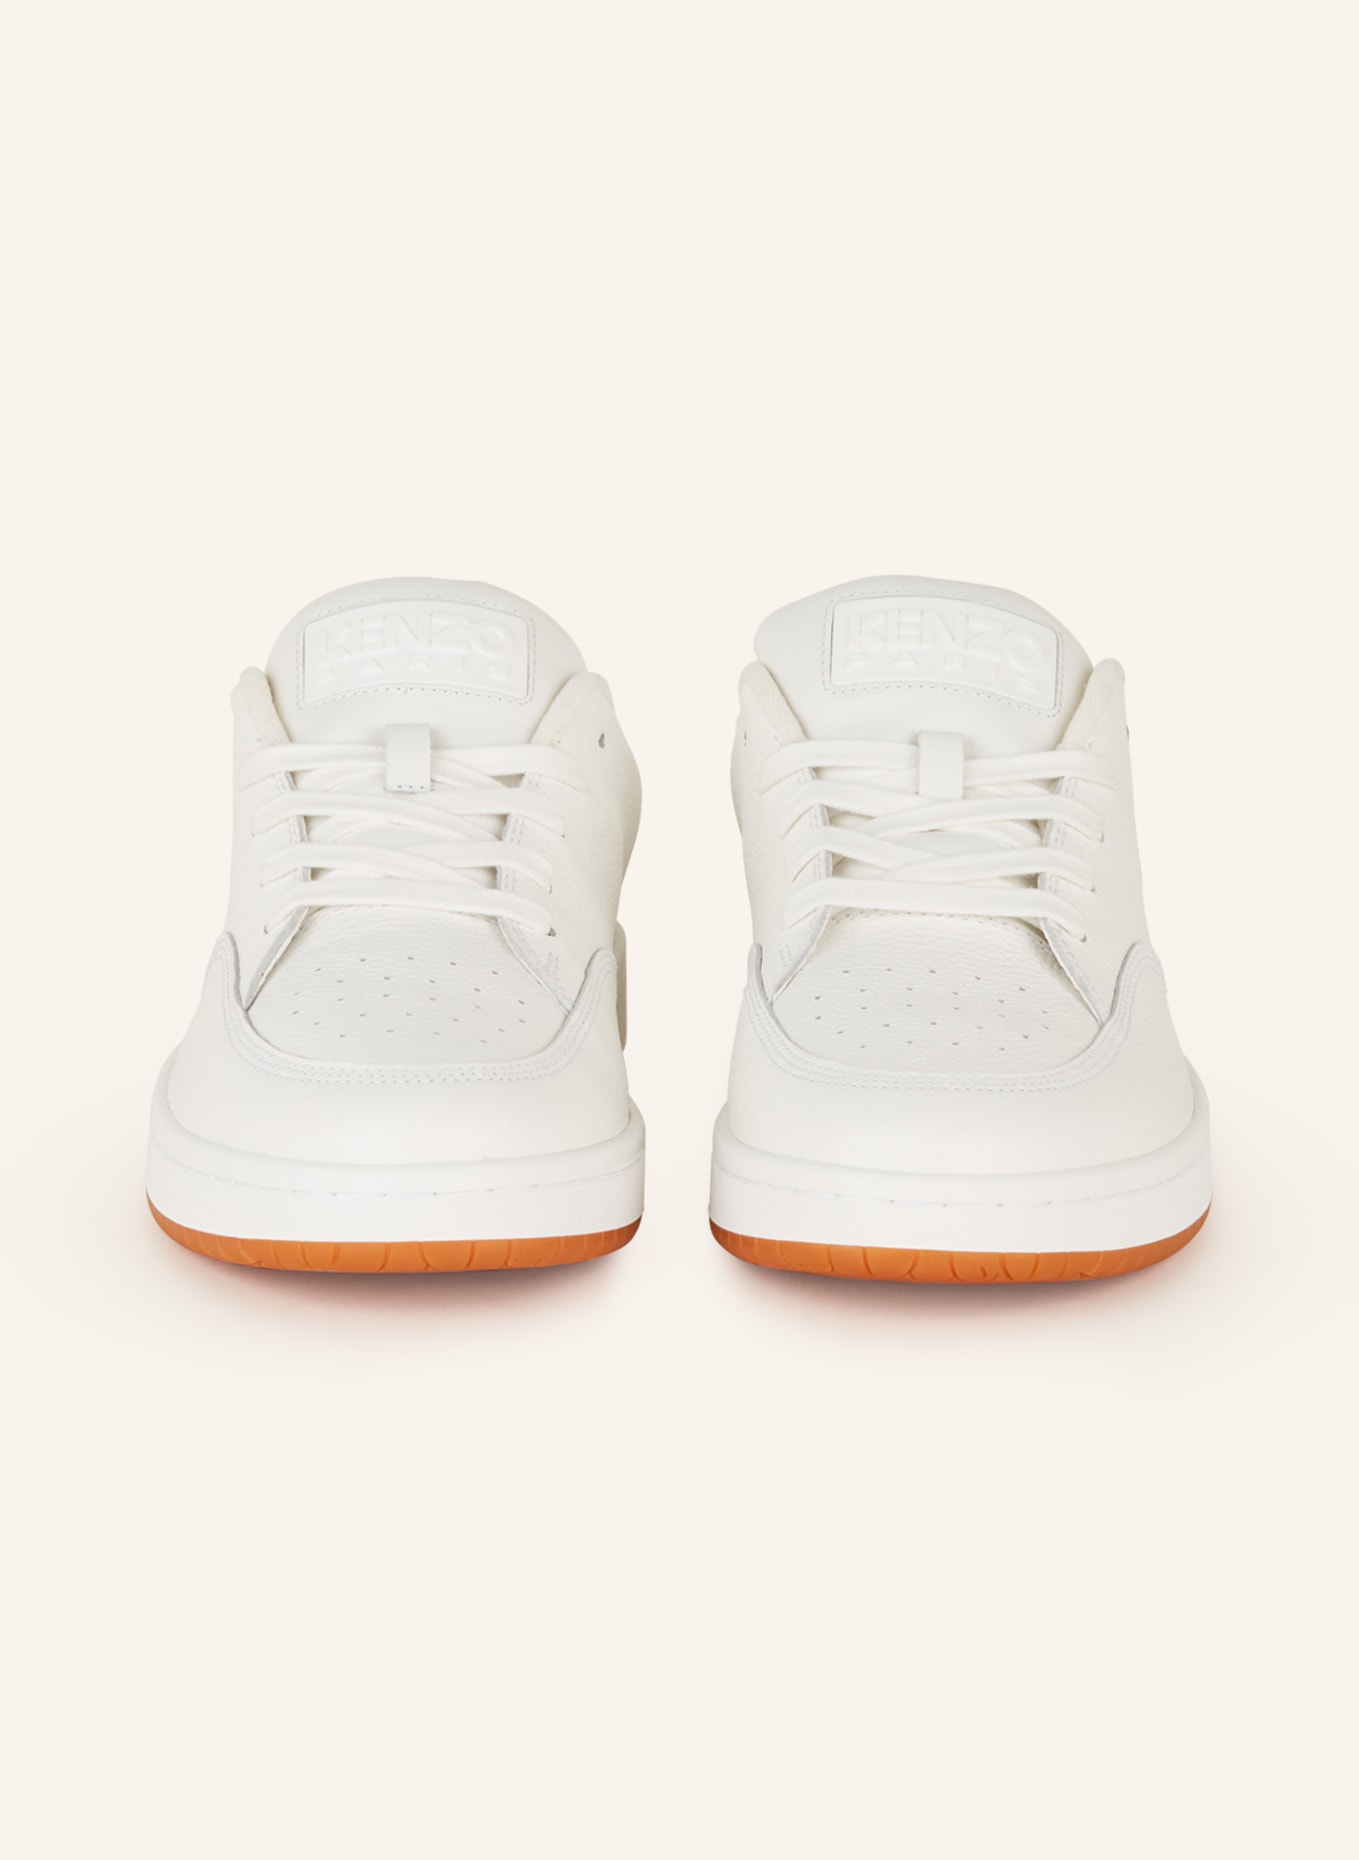 KENZO Sneakers, Color: WHITE (Image 3)